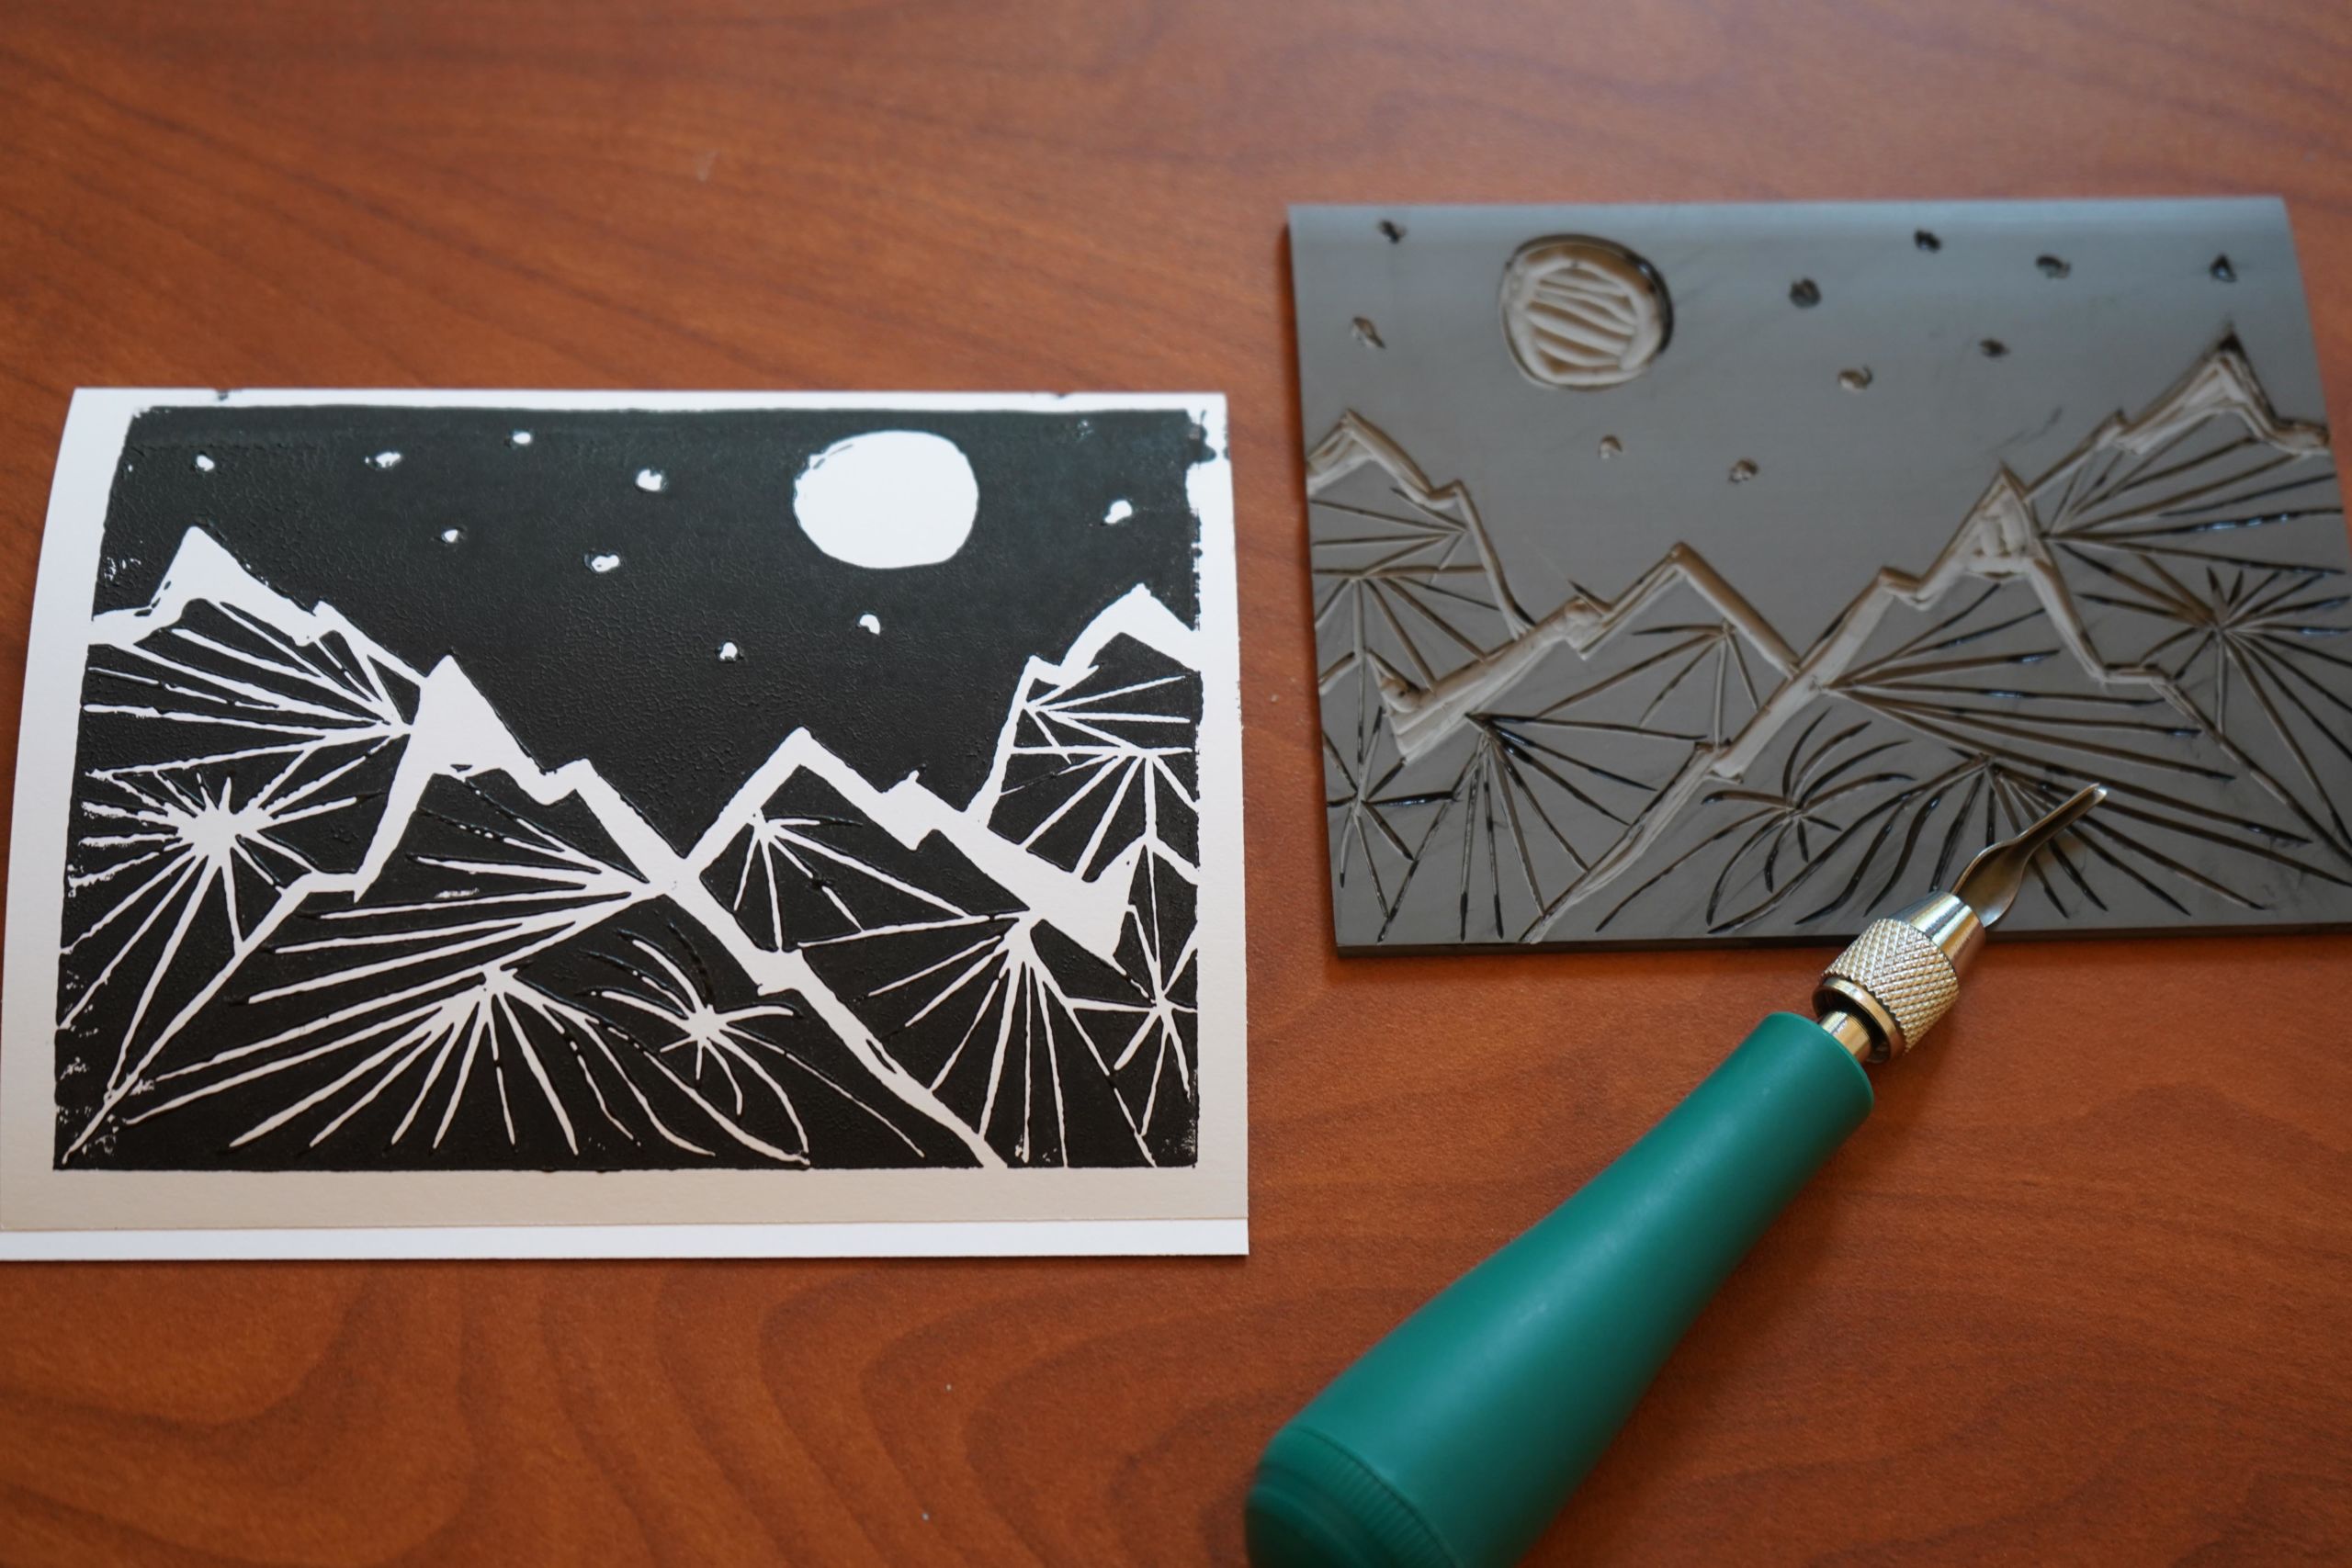 linocut block next to print and carving tool